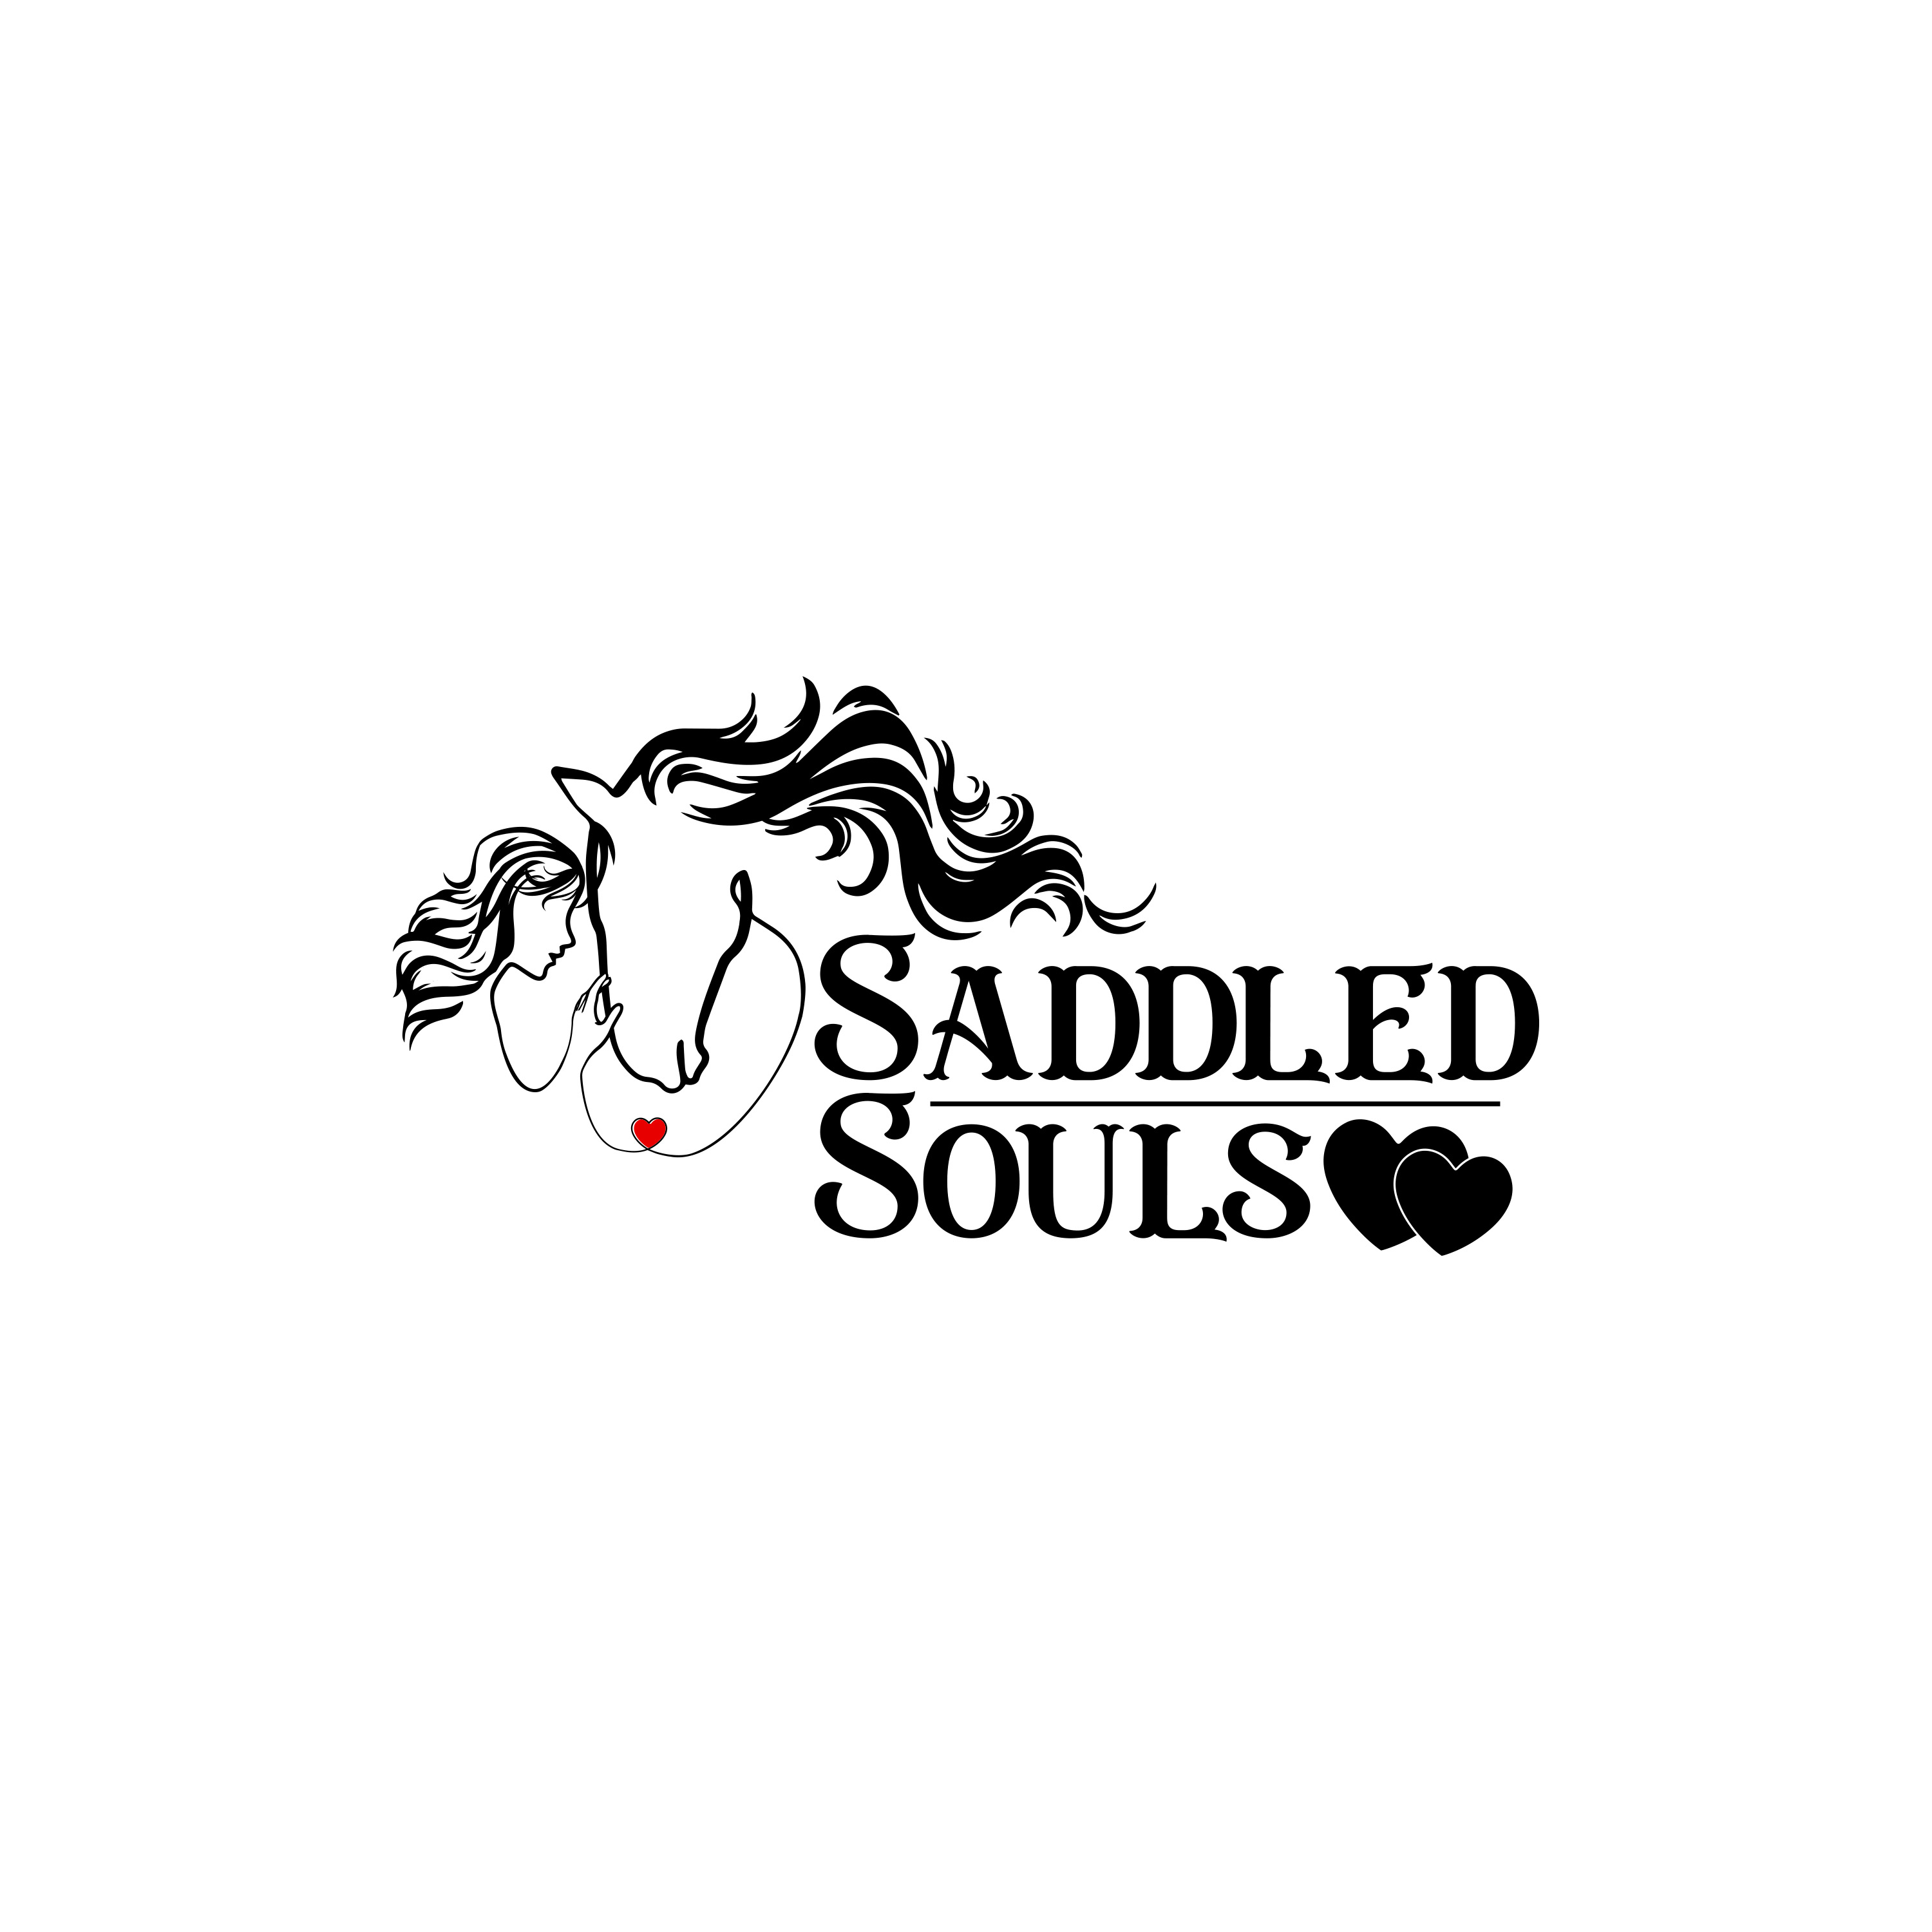 Lauren Crocker Announces New Hippotherapy Equine Center as Part of Saddled Souls Initiative for Children